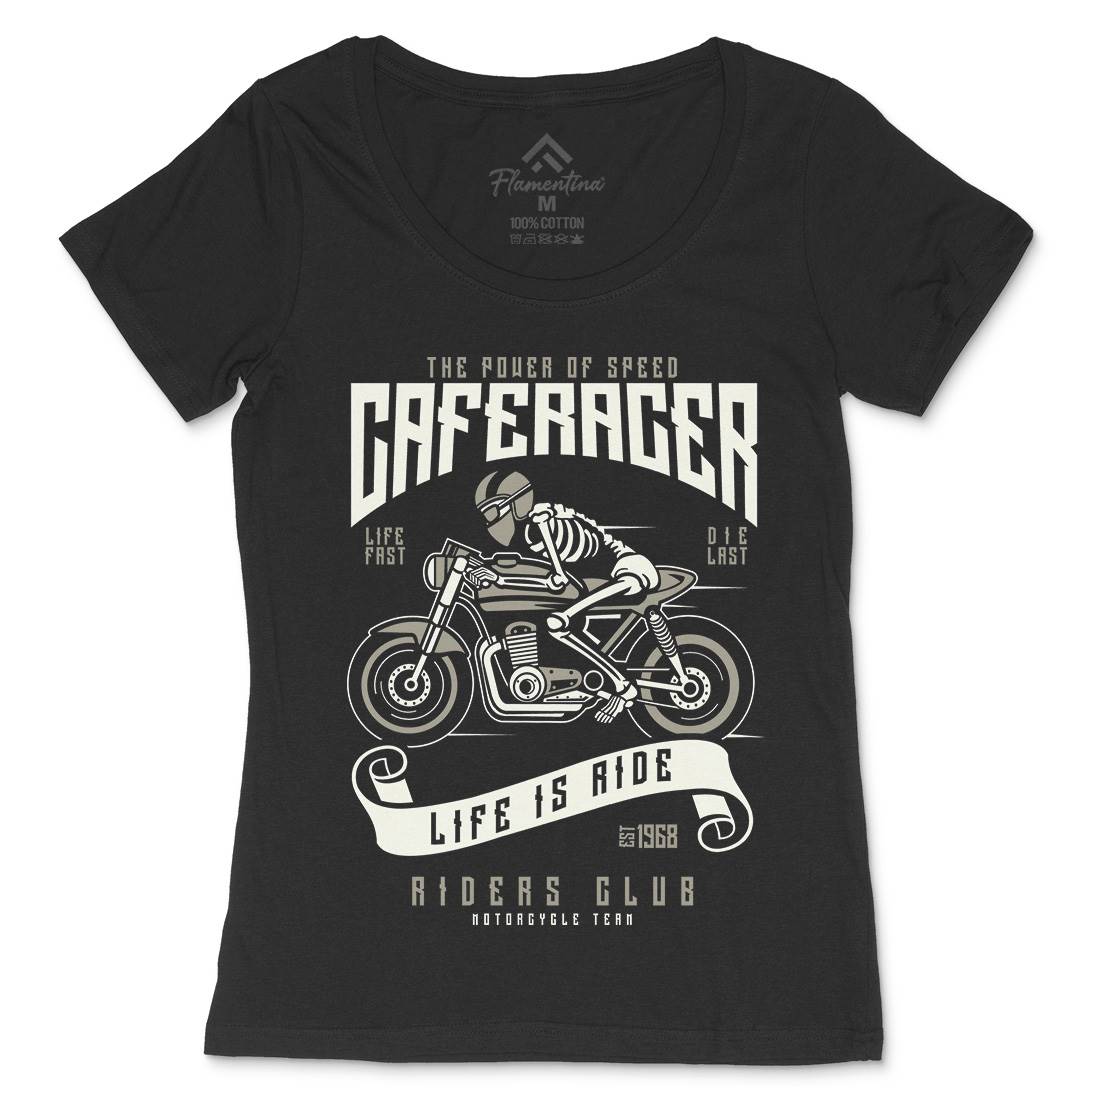 Speed Of Caferacer Womens Scoop Neck T-Shirt Motorcycles A154